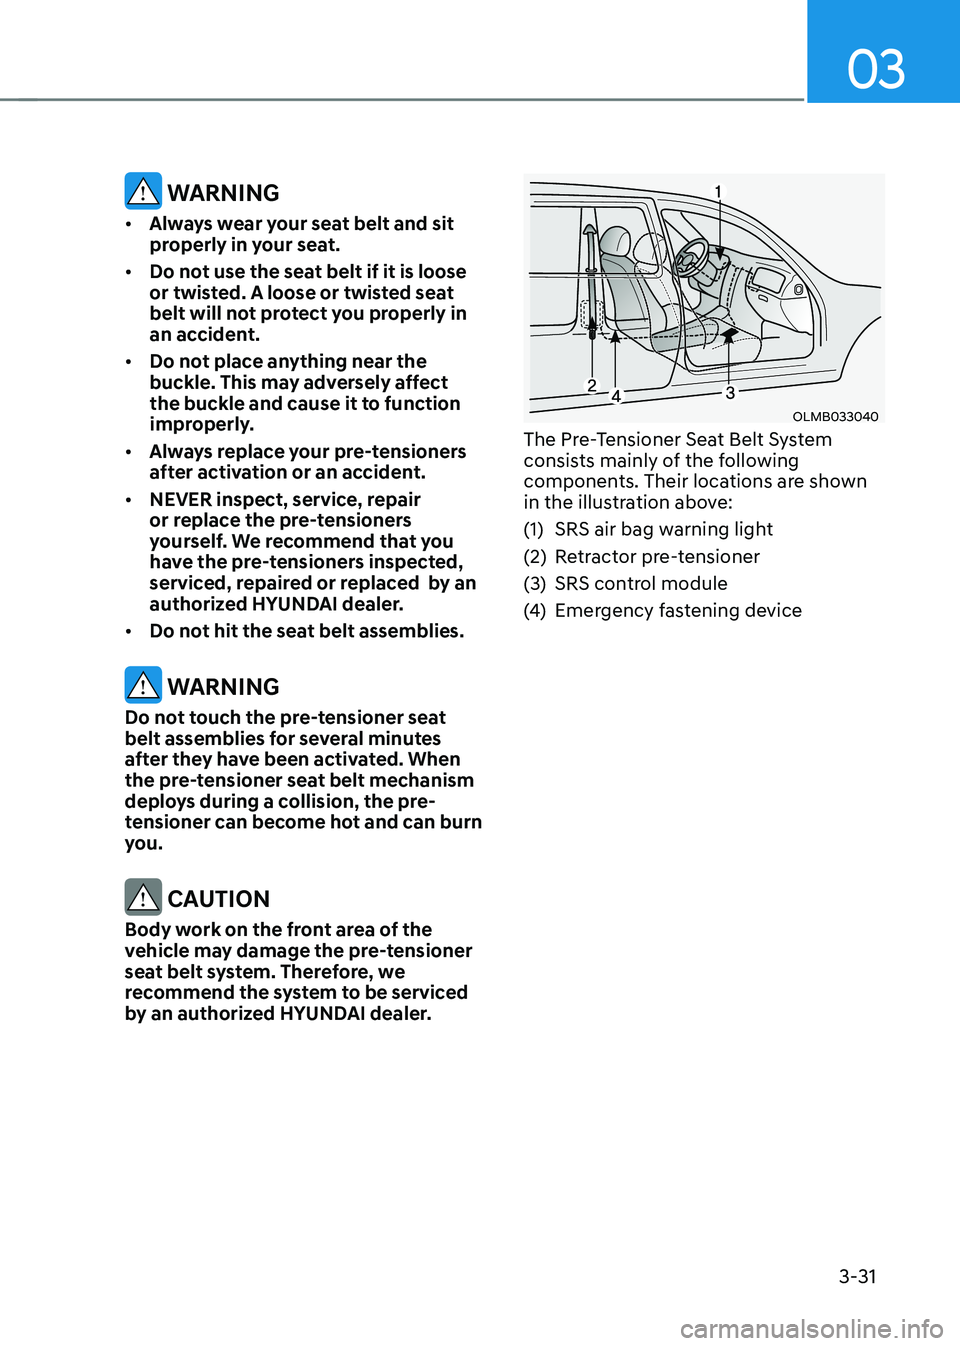 HYUNDAI TUCSON 2022 Owners Manual 03
3-31
 WARNING
•	Always wear your seat belt and sit 
properly in your seat.
•	 Do not use the seat belt if it is loose 
or twisted. A loose or twisted seat 
belt will not protect you properly in